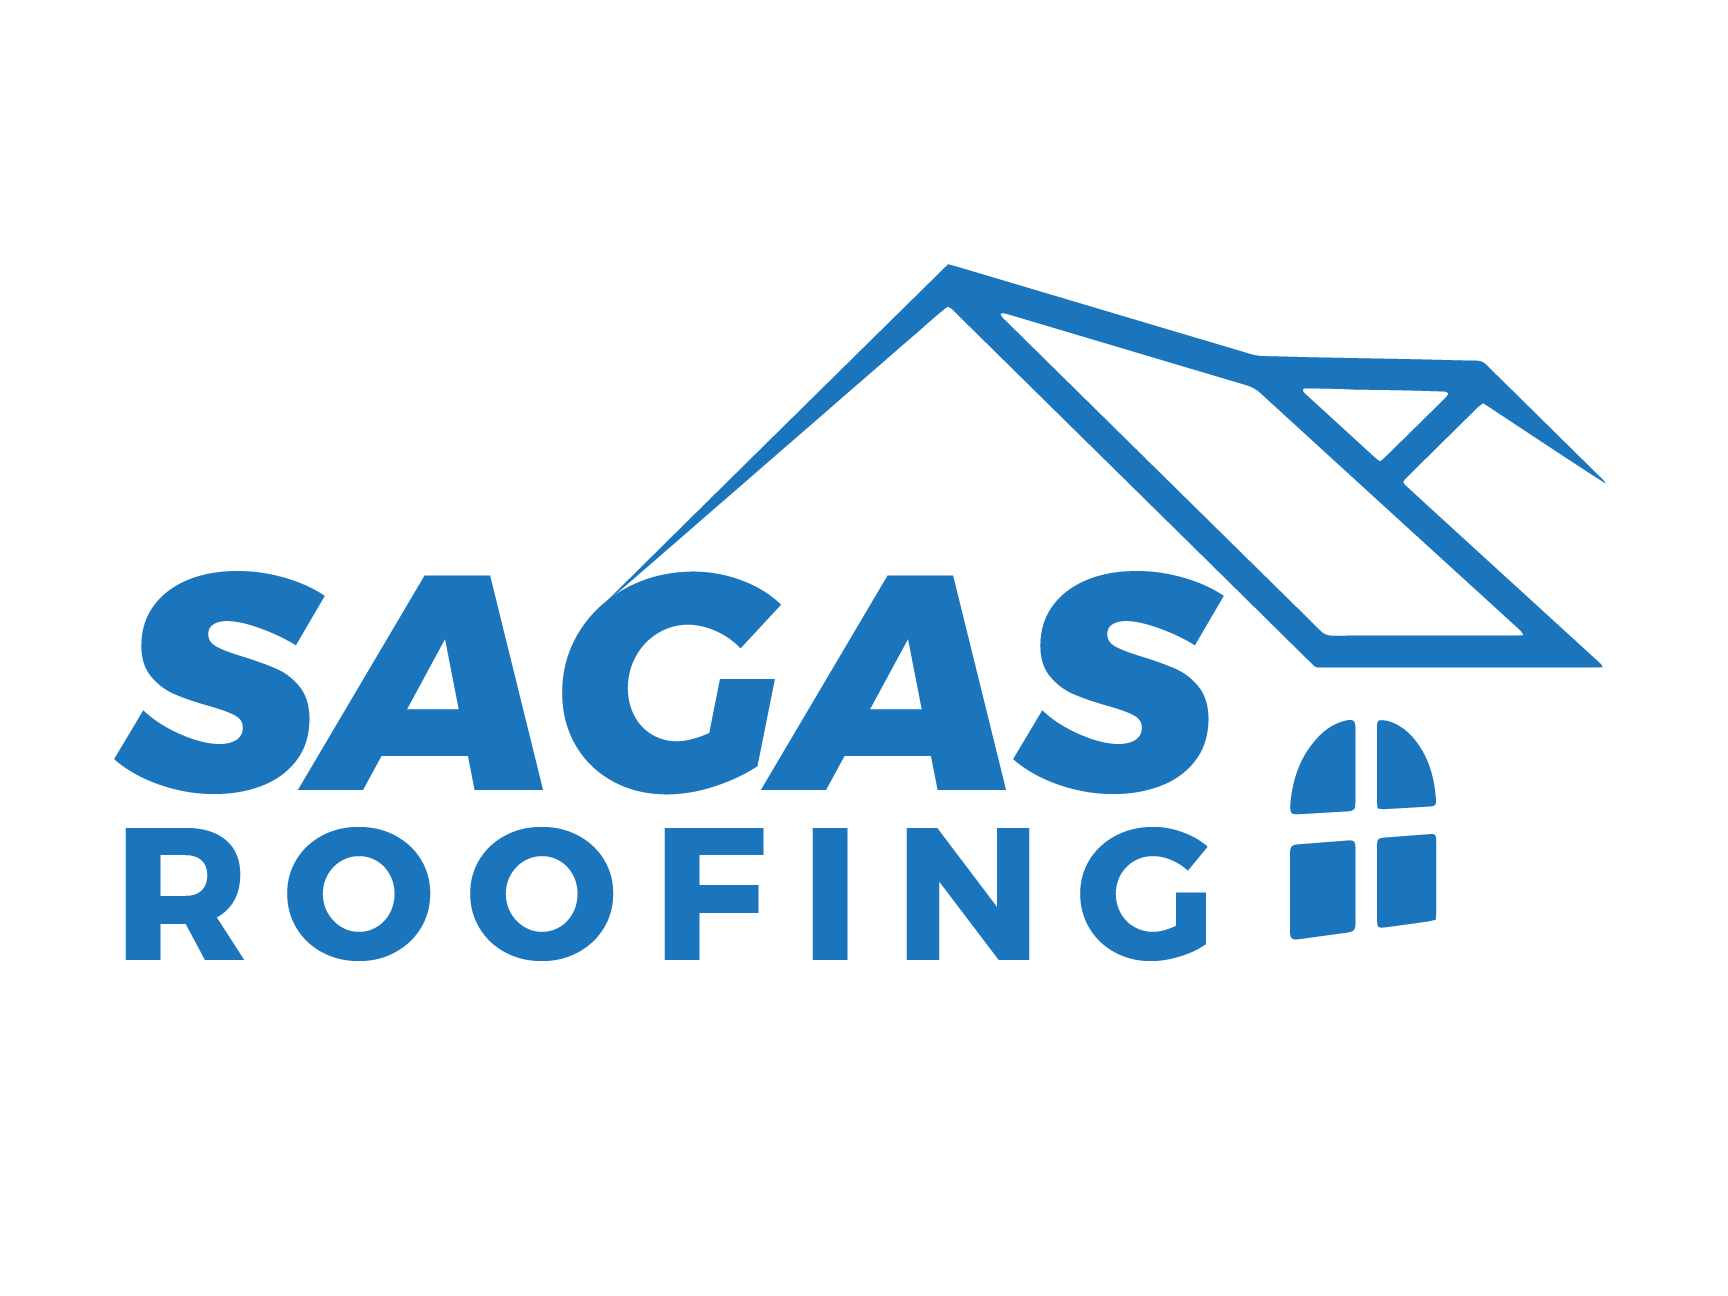 Sagas Roofing